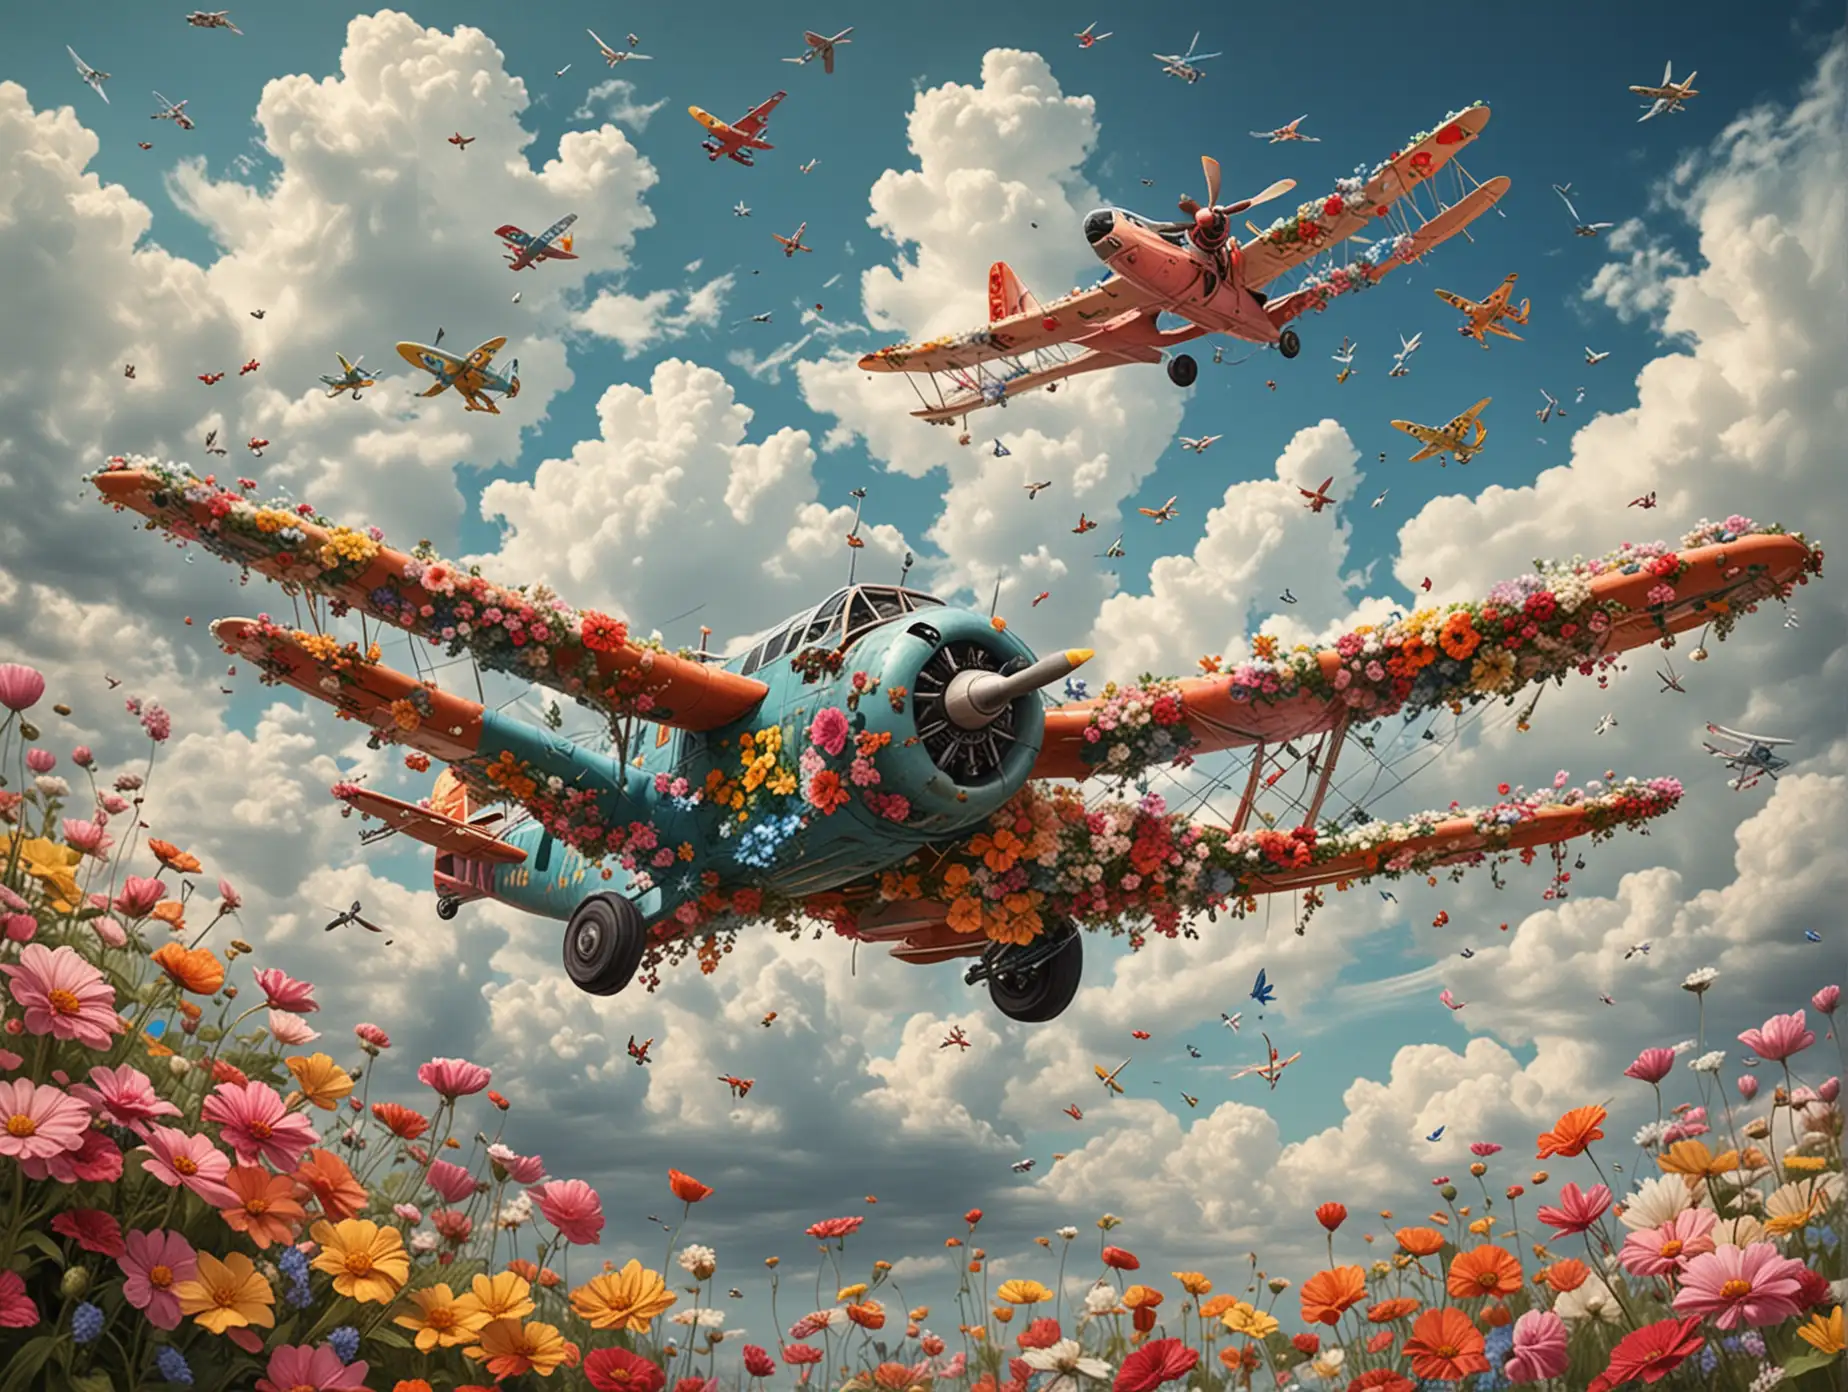 Colorful Whimsical Airplanes Flying in a Sky Full of Flowers